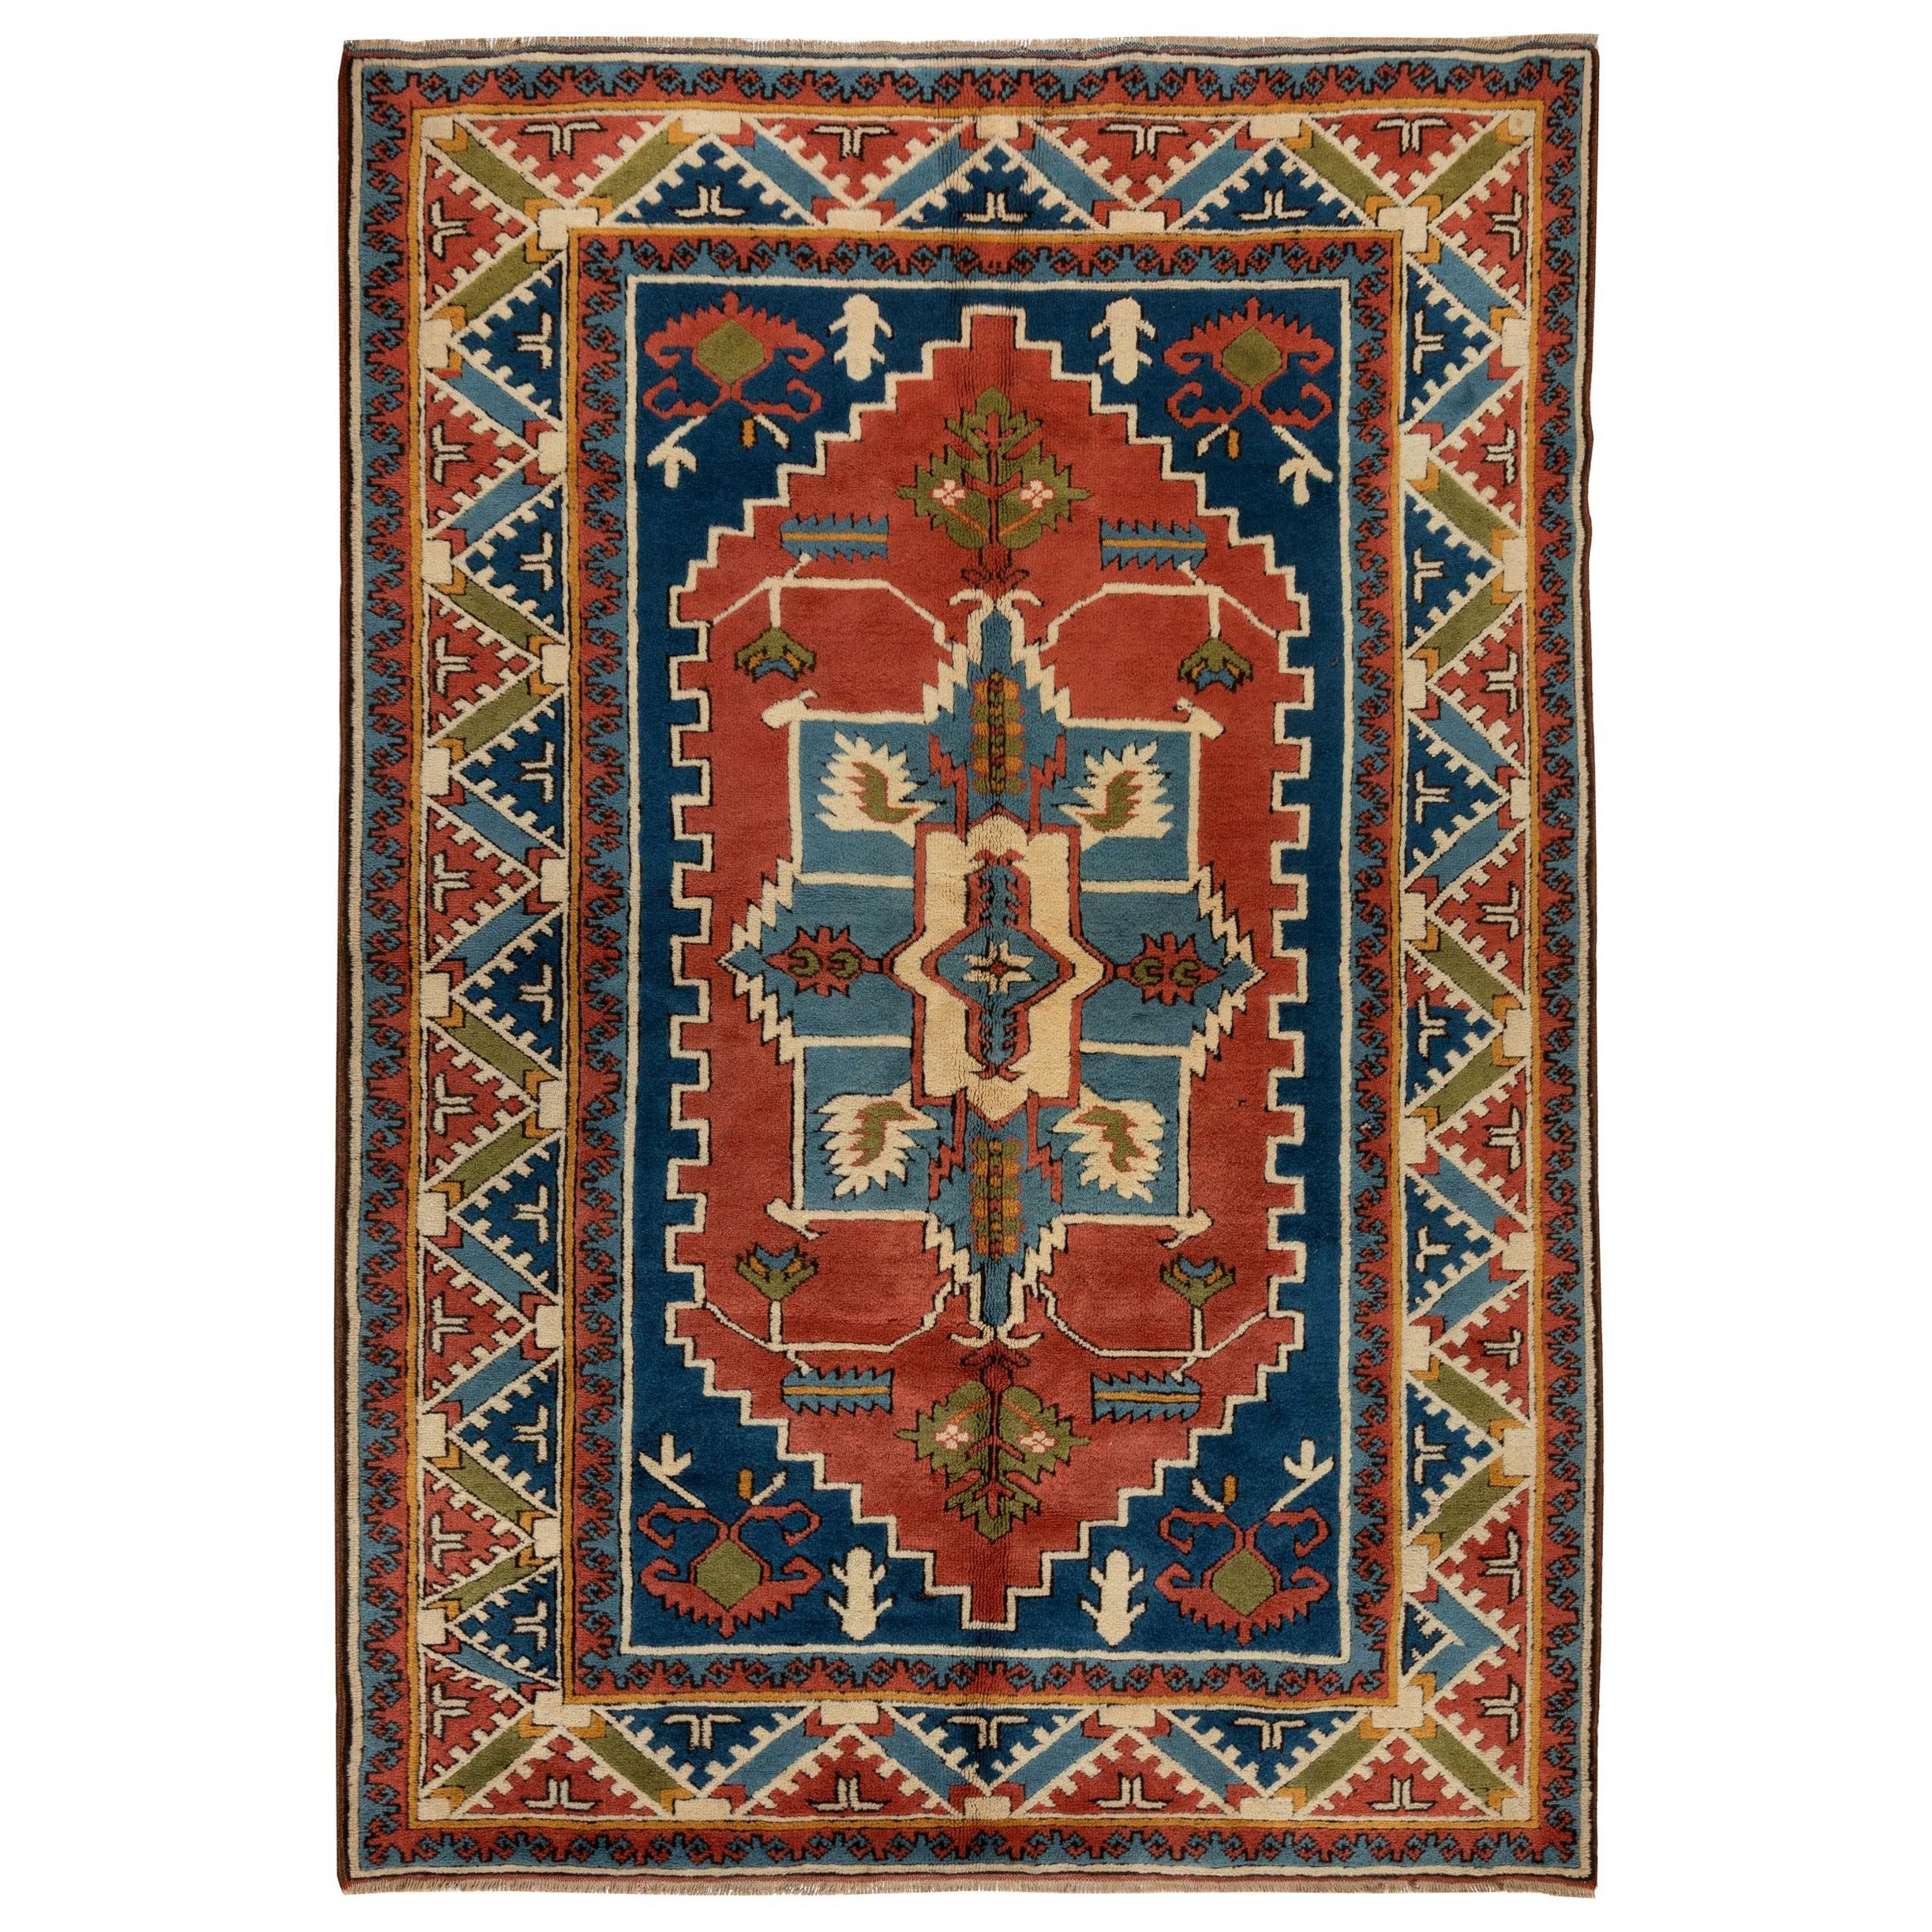 6x8.6 Ft Hand-Knotted New Area Rug, Soft Medium Wool Pile, Anatolian Carpet For Sale